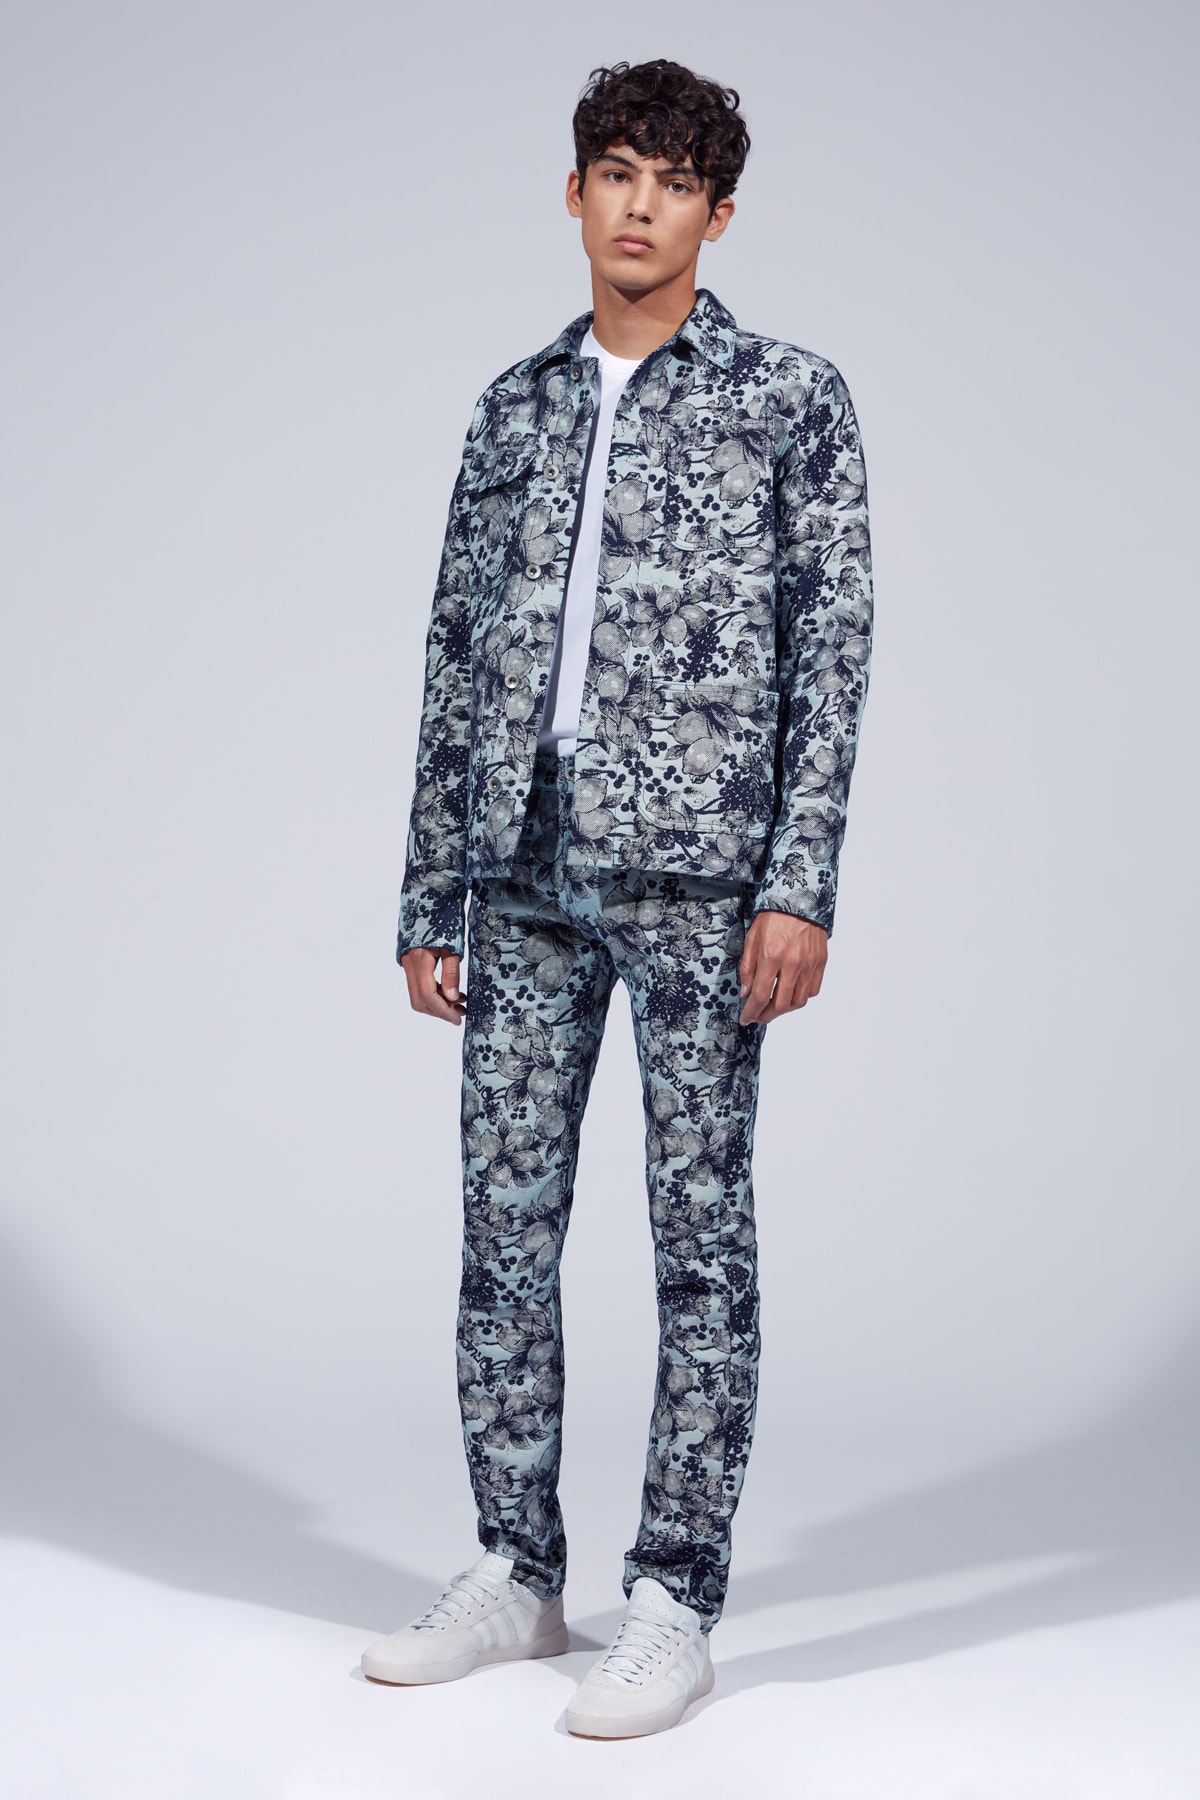 Fiorucci Spring Summer 2019 Collection Lookbook Floral Patterned Jacket Pants Blue White